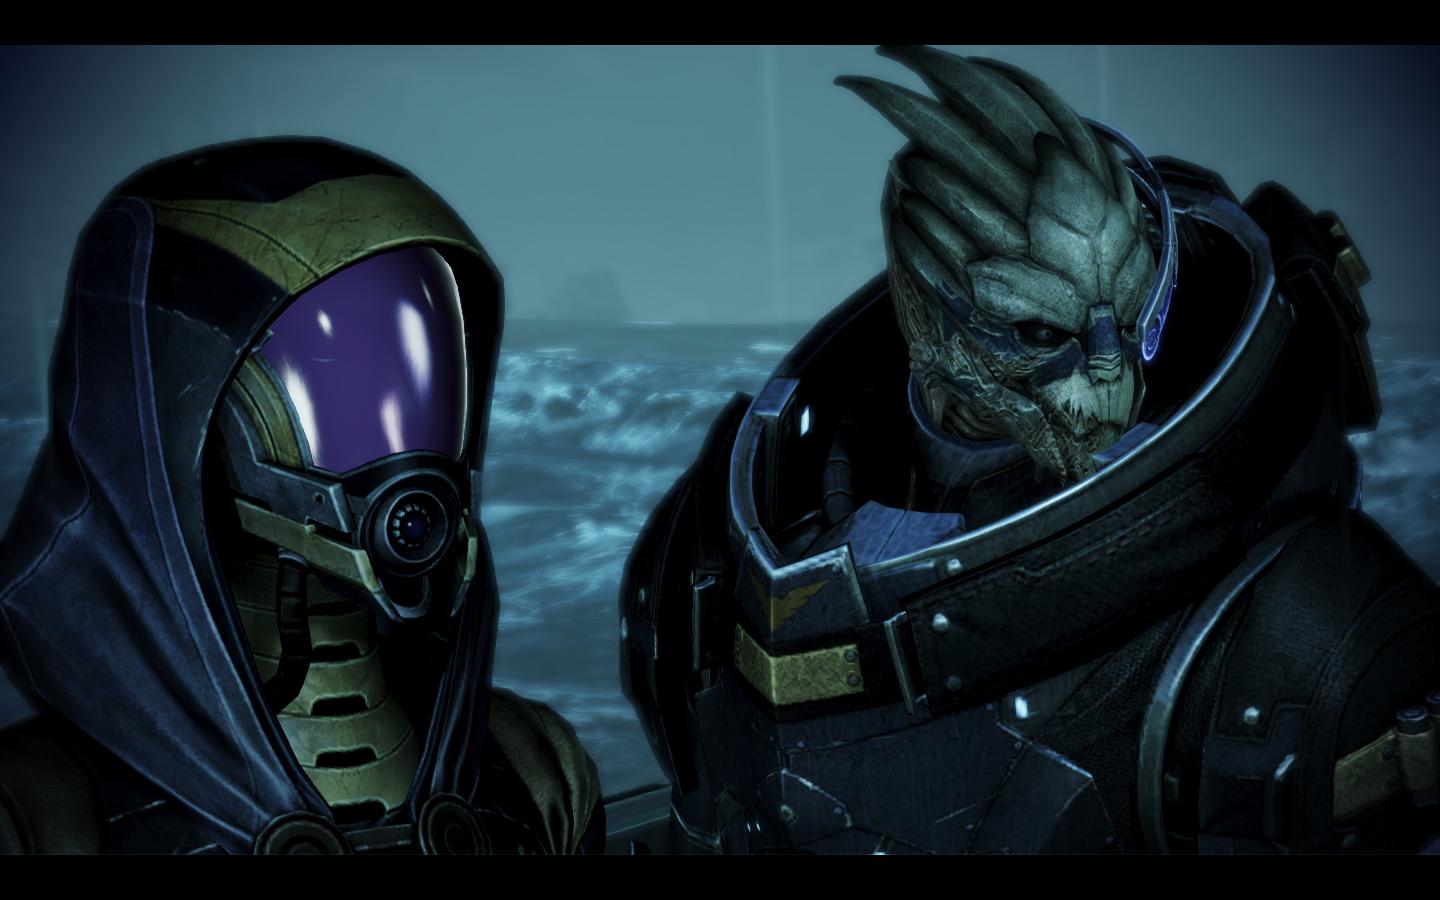 me3_garrus_and_tali_5_by_chicksaw2002-d5dyoe6.jpg